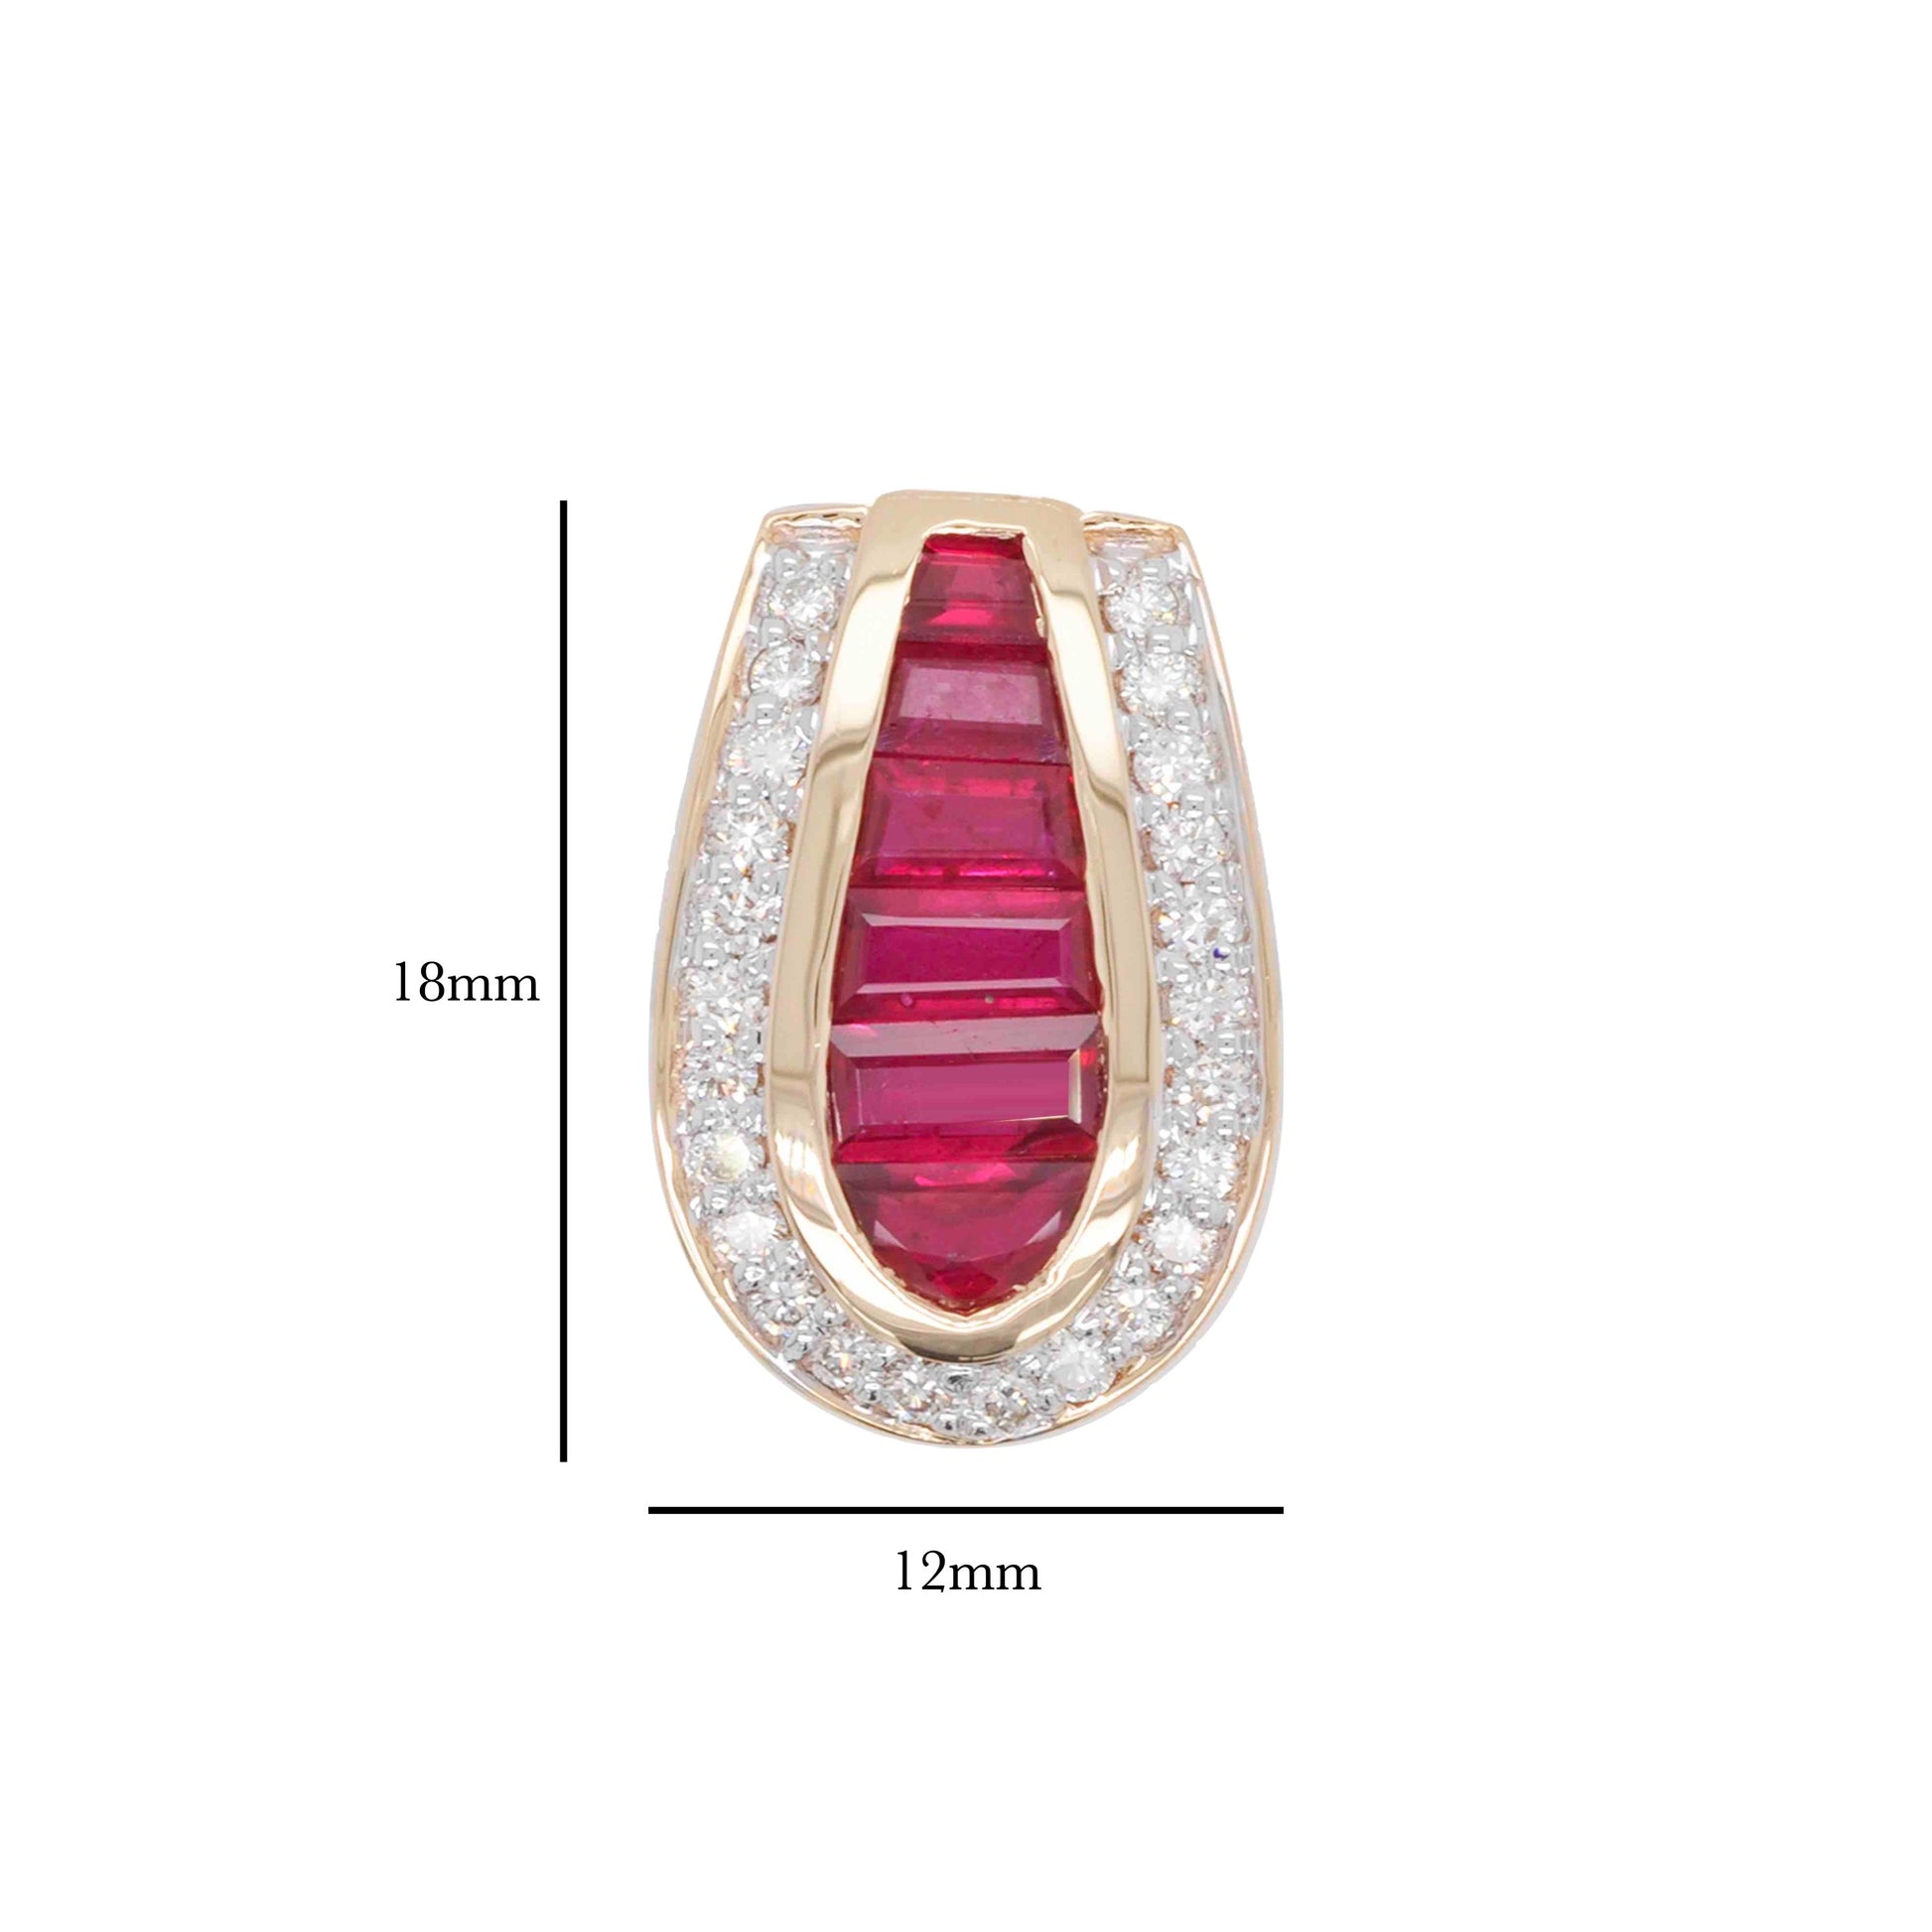 18K Gold Ruby Tapered Baguette Art Deco Diamond Pendant Necklace - Vaibhav Dhadda Jewelry